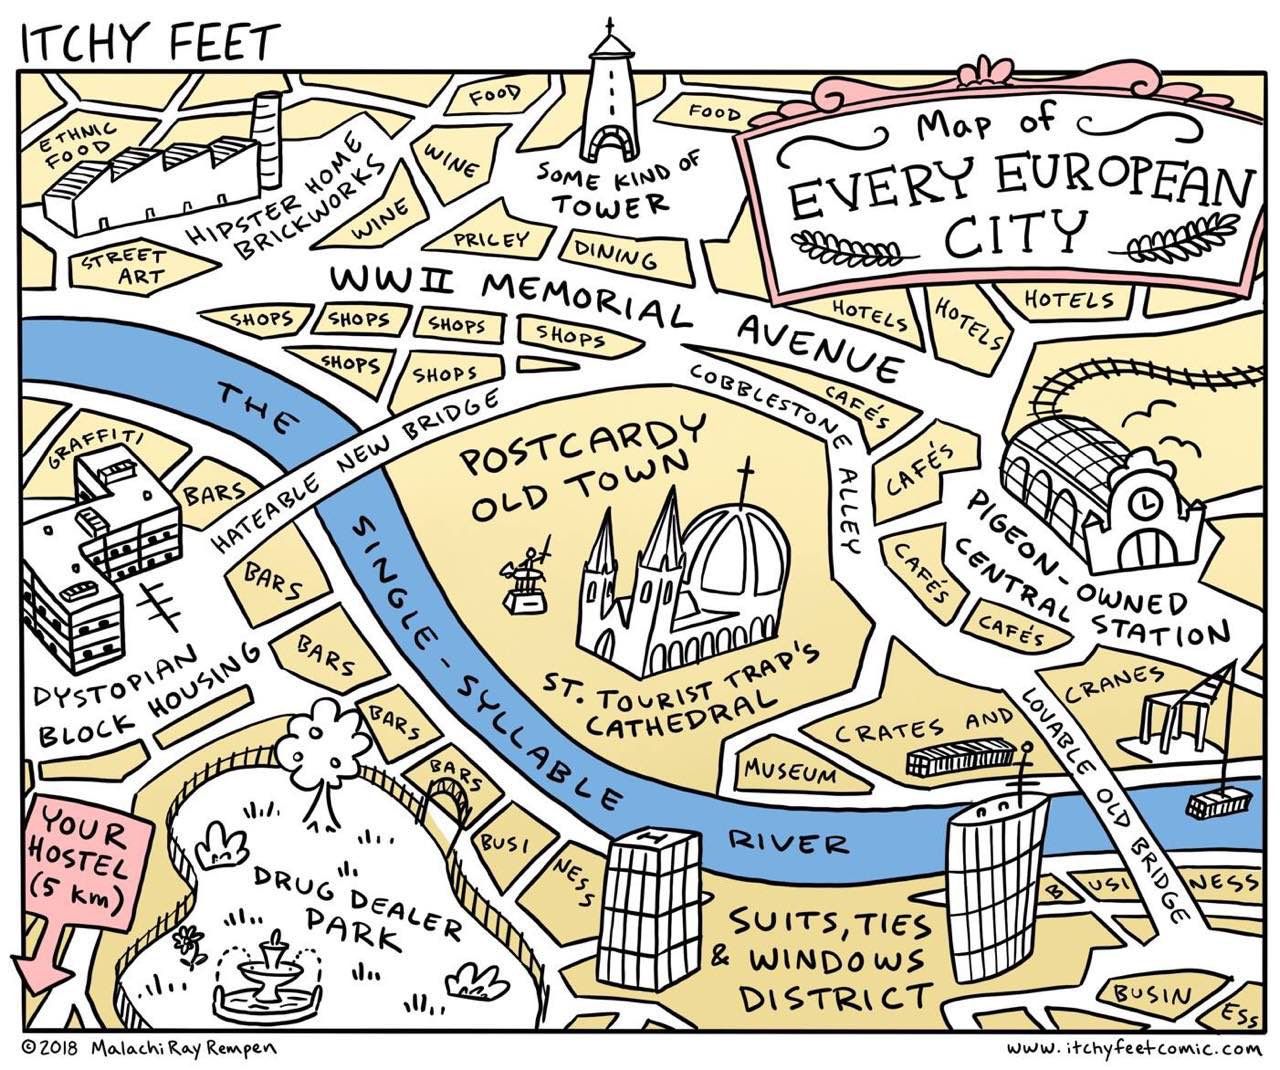 A map of every European city